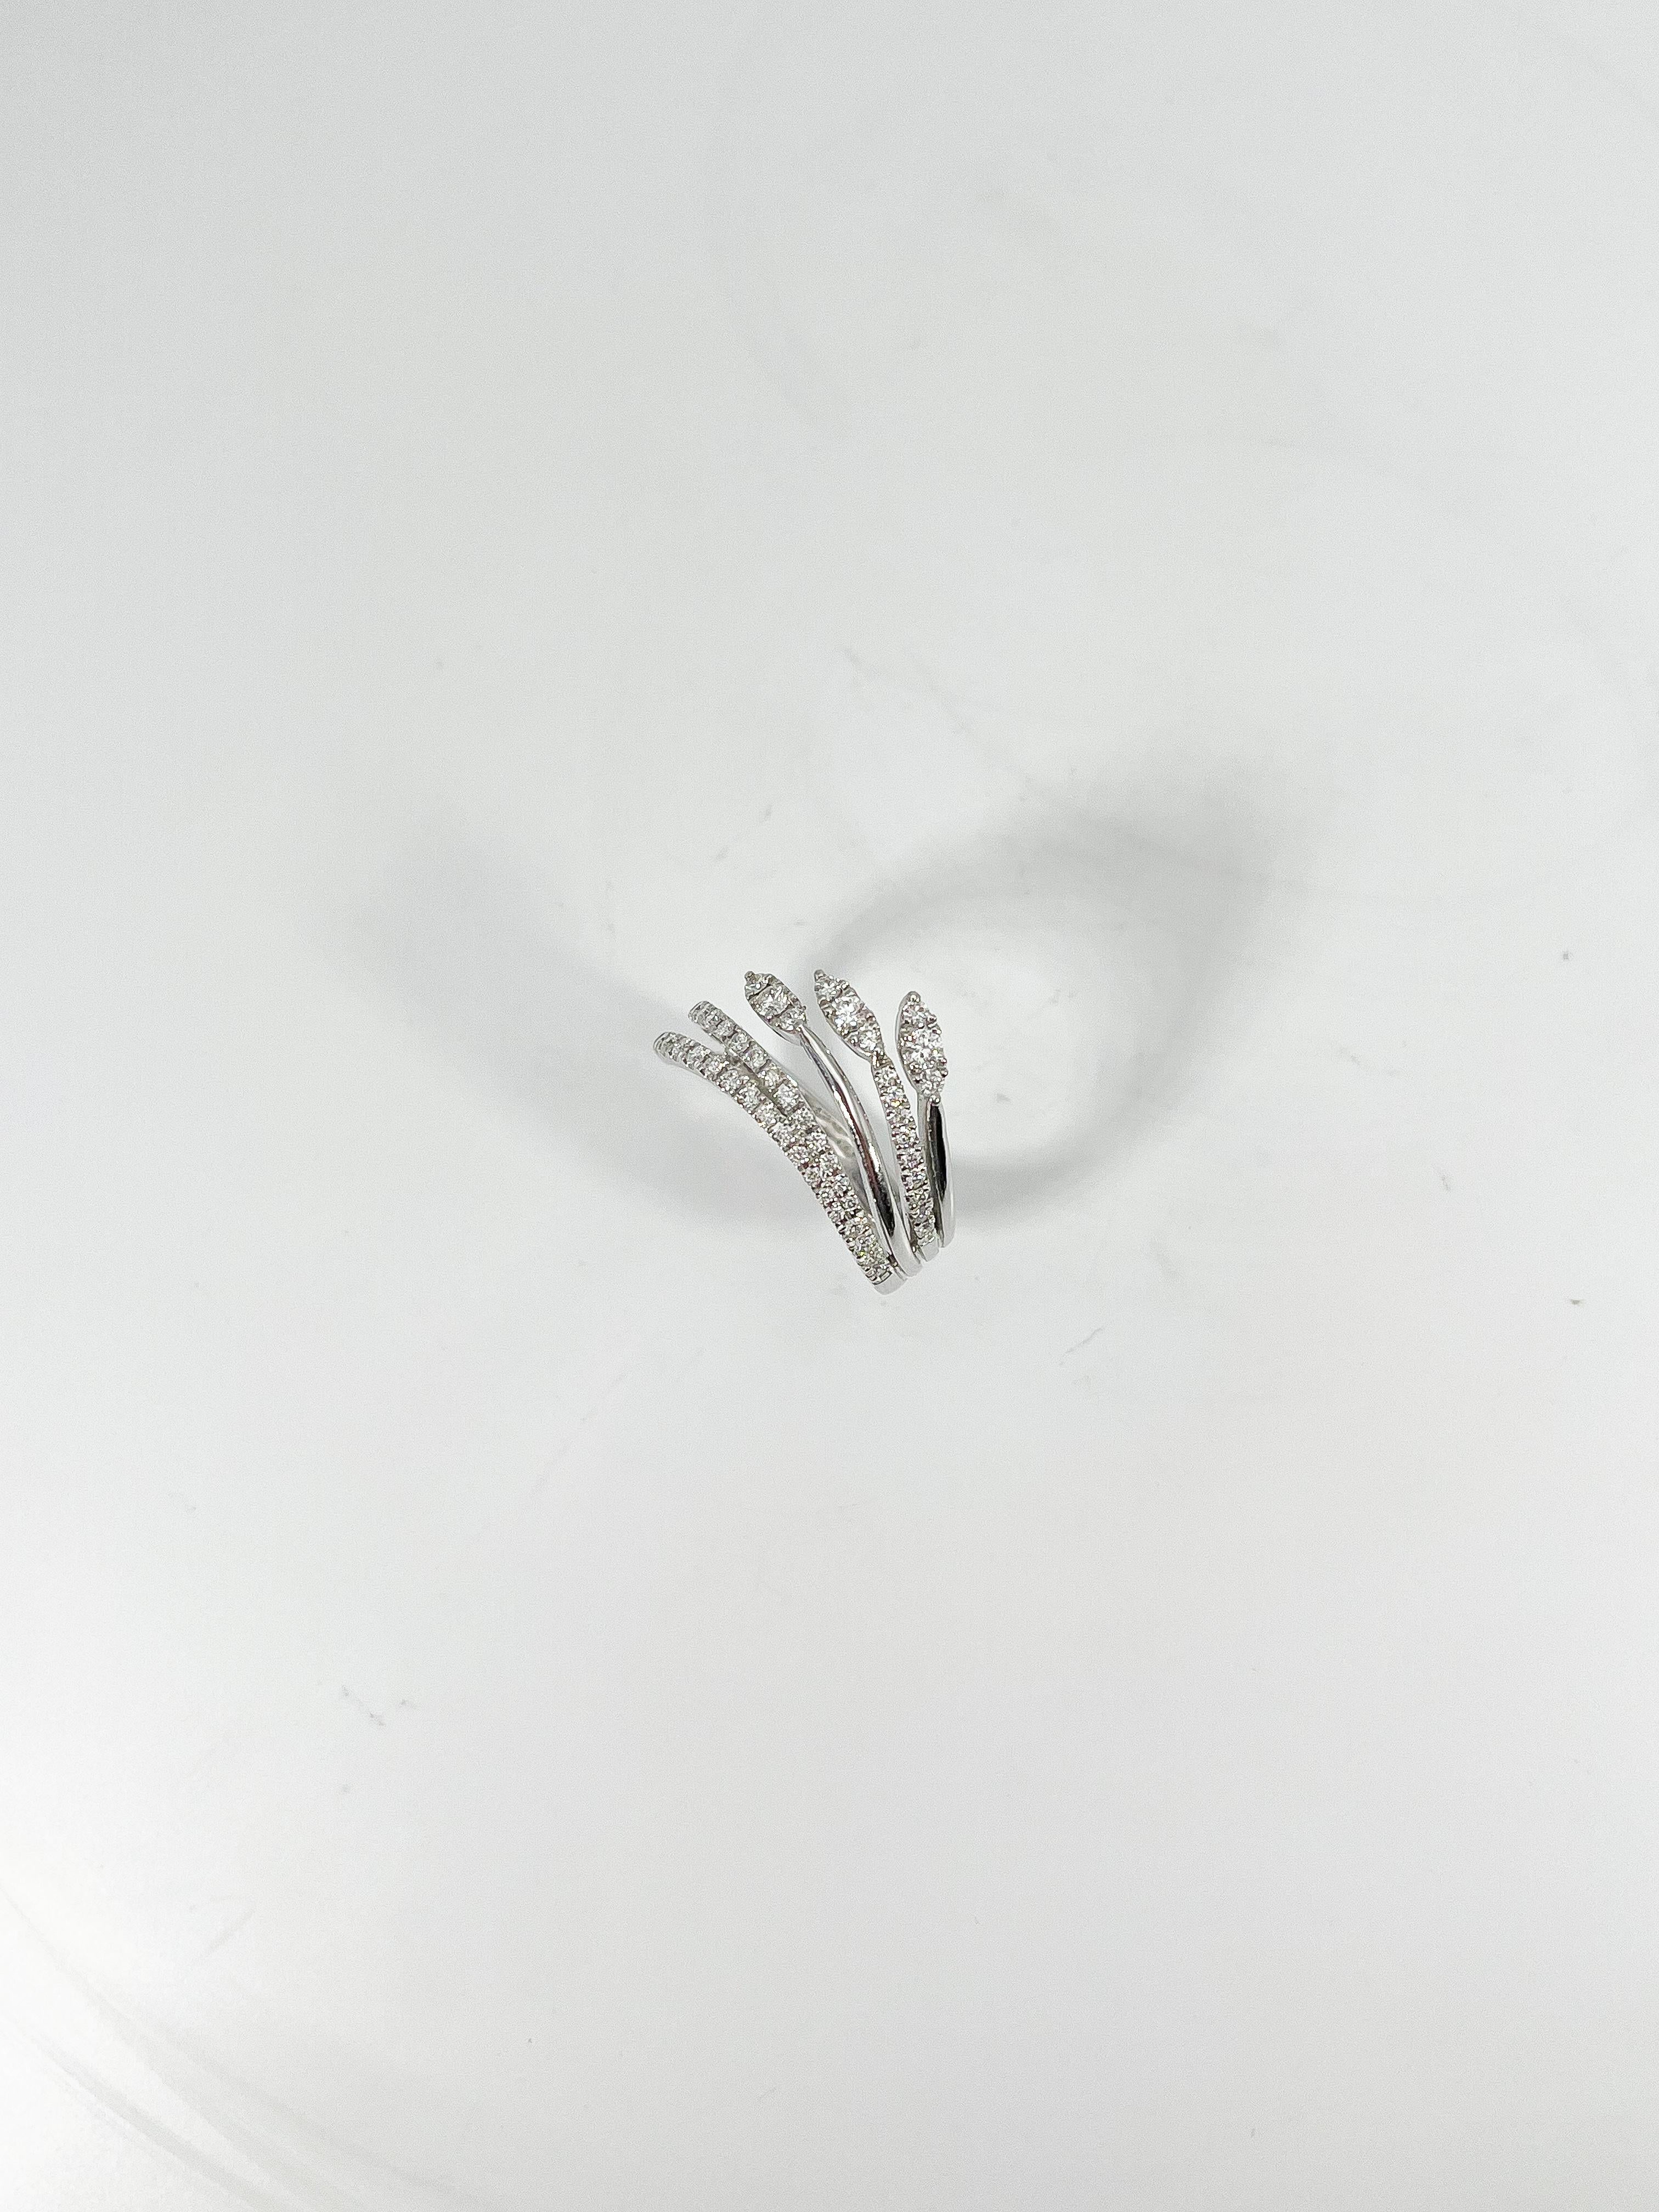 Simon G 18k white gold .50 CTW diamond fashion ring. The diamonds in this ring are all round, the width is 10.8 mm, the ring size is a 6 1/2, and it has a total weight of 4.6 grams.
Part number- LR2541